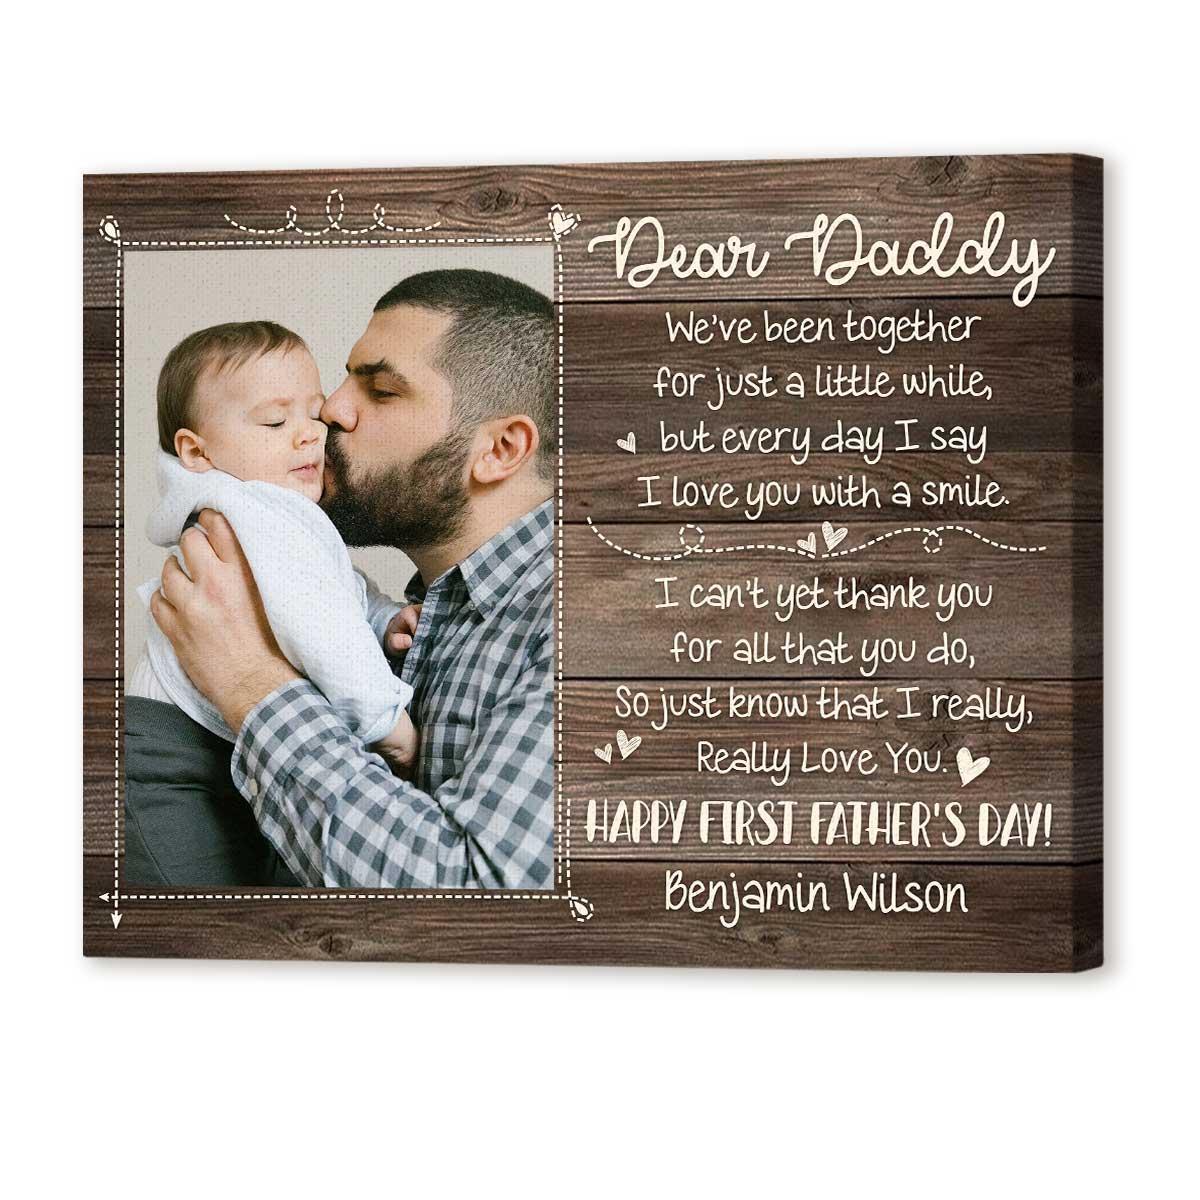 https://benicee.com/wp-content/uploads/2022/10/First-Time-Dad-Gifts-For-New-Dads-First-Fathers-Day-Gift-for-Husband-1st-Happy-First-Fathers-Day-Art-3.jpg